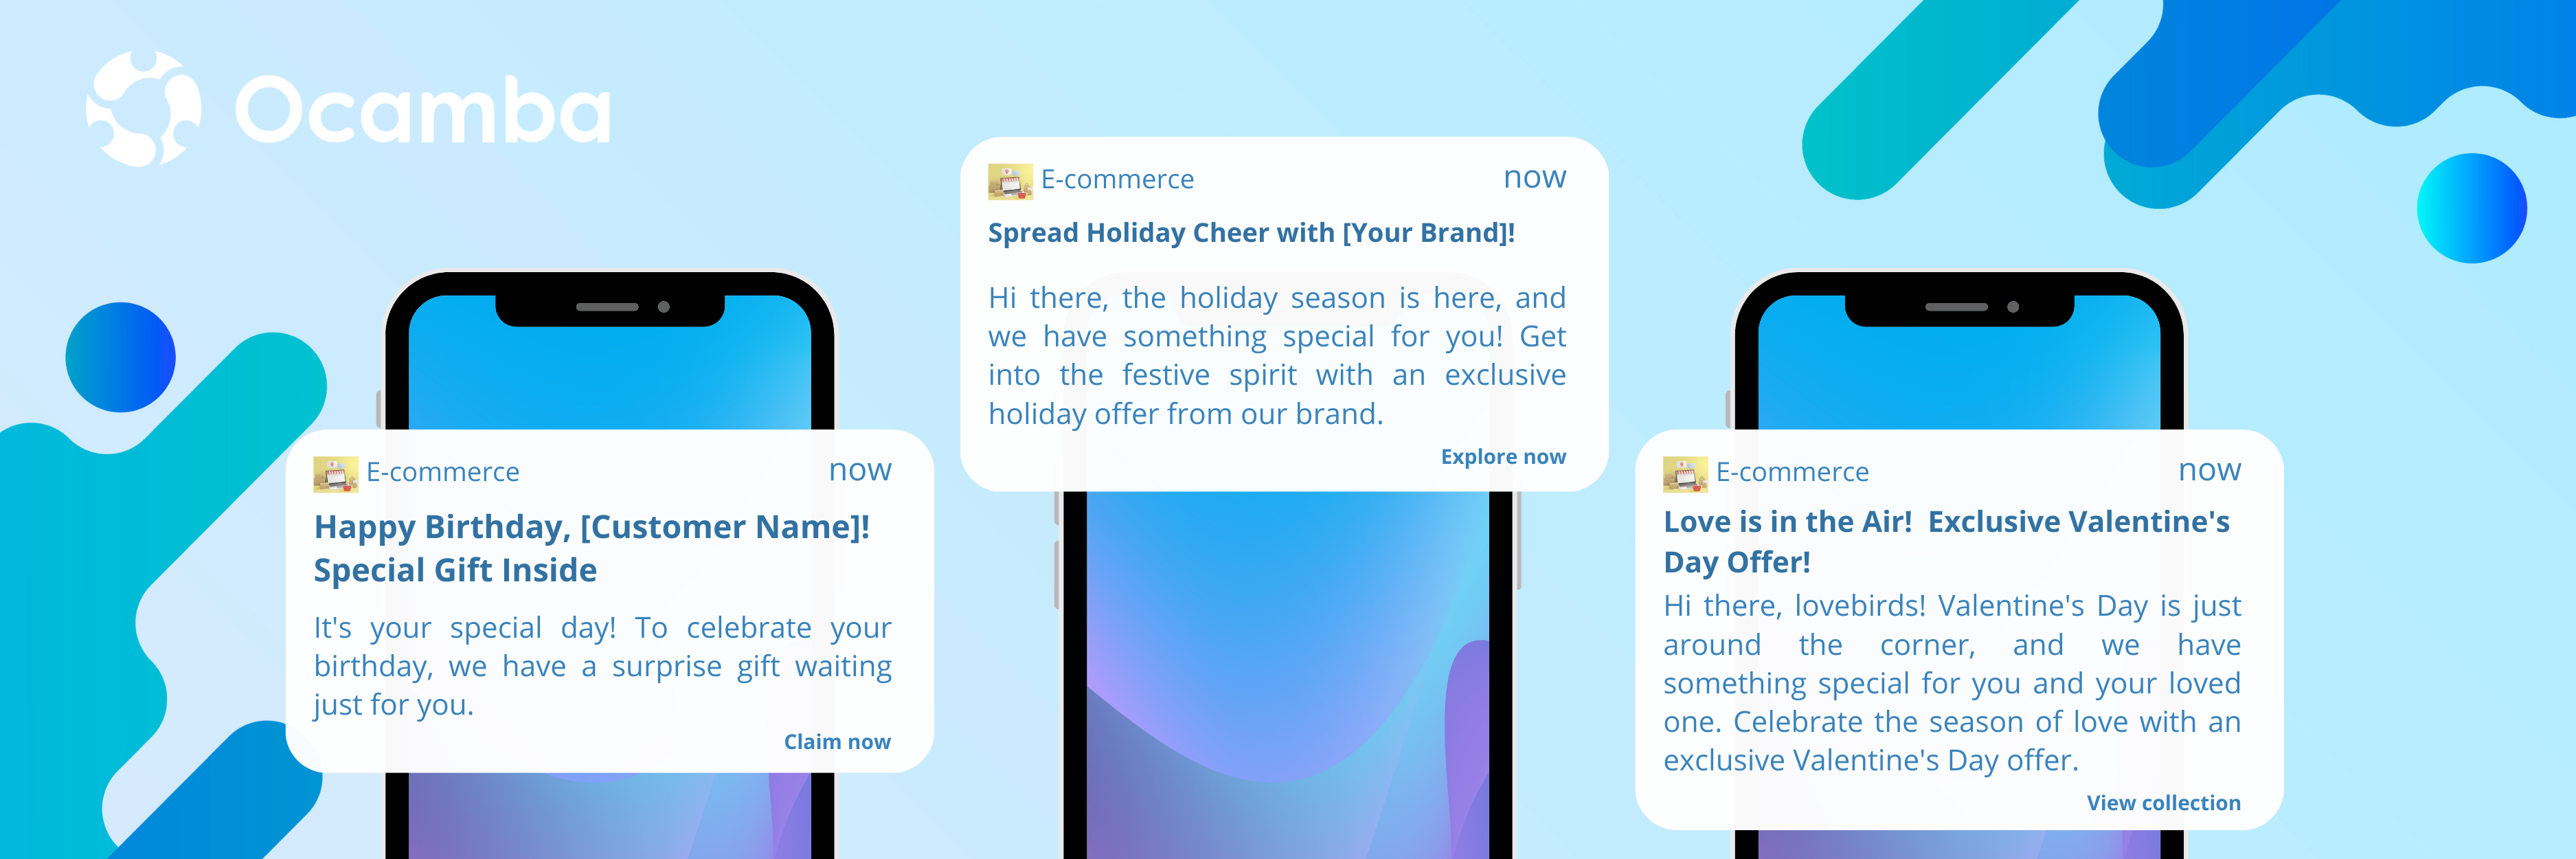 Ecommerce push notifications templates for special occassions and birthdays